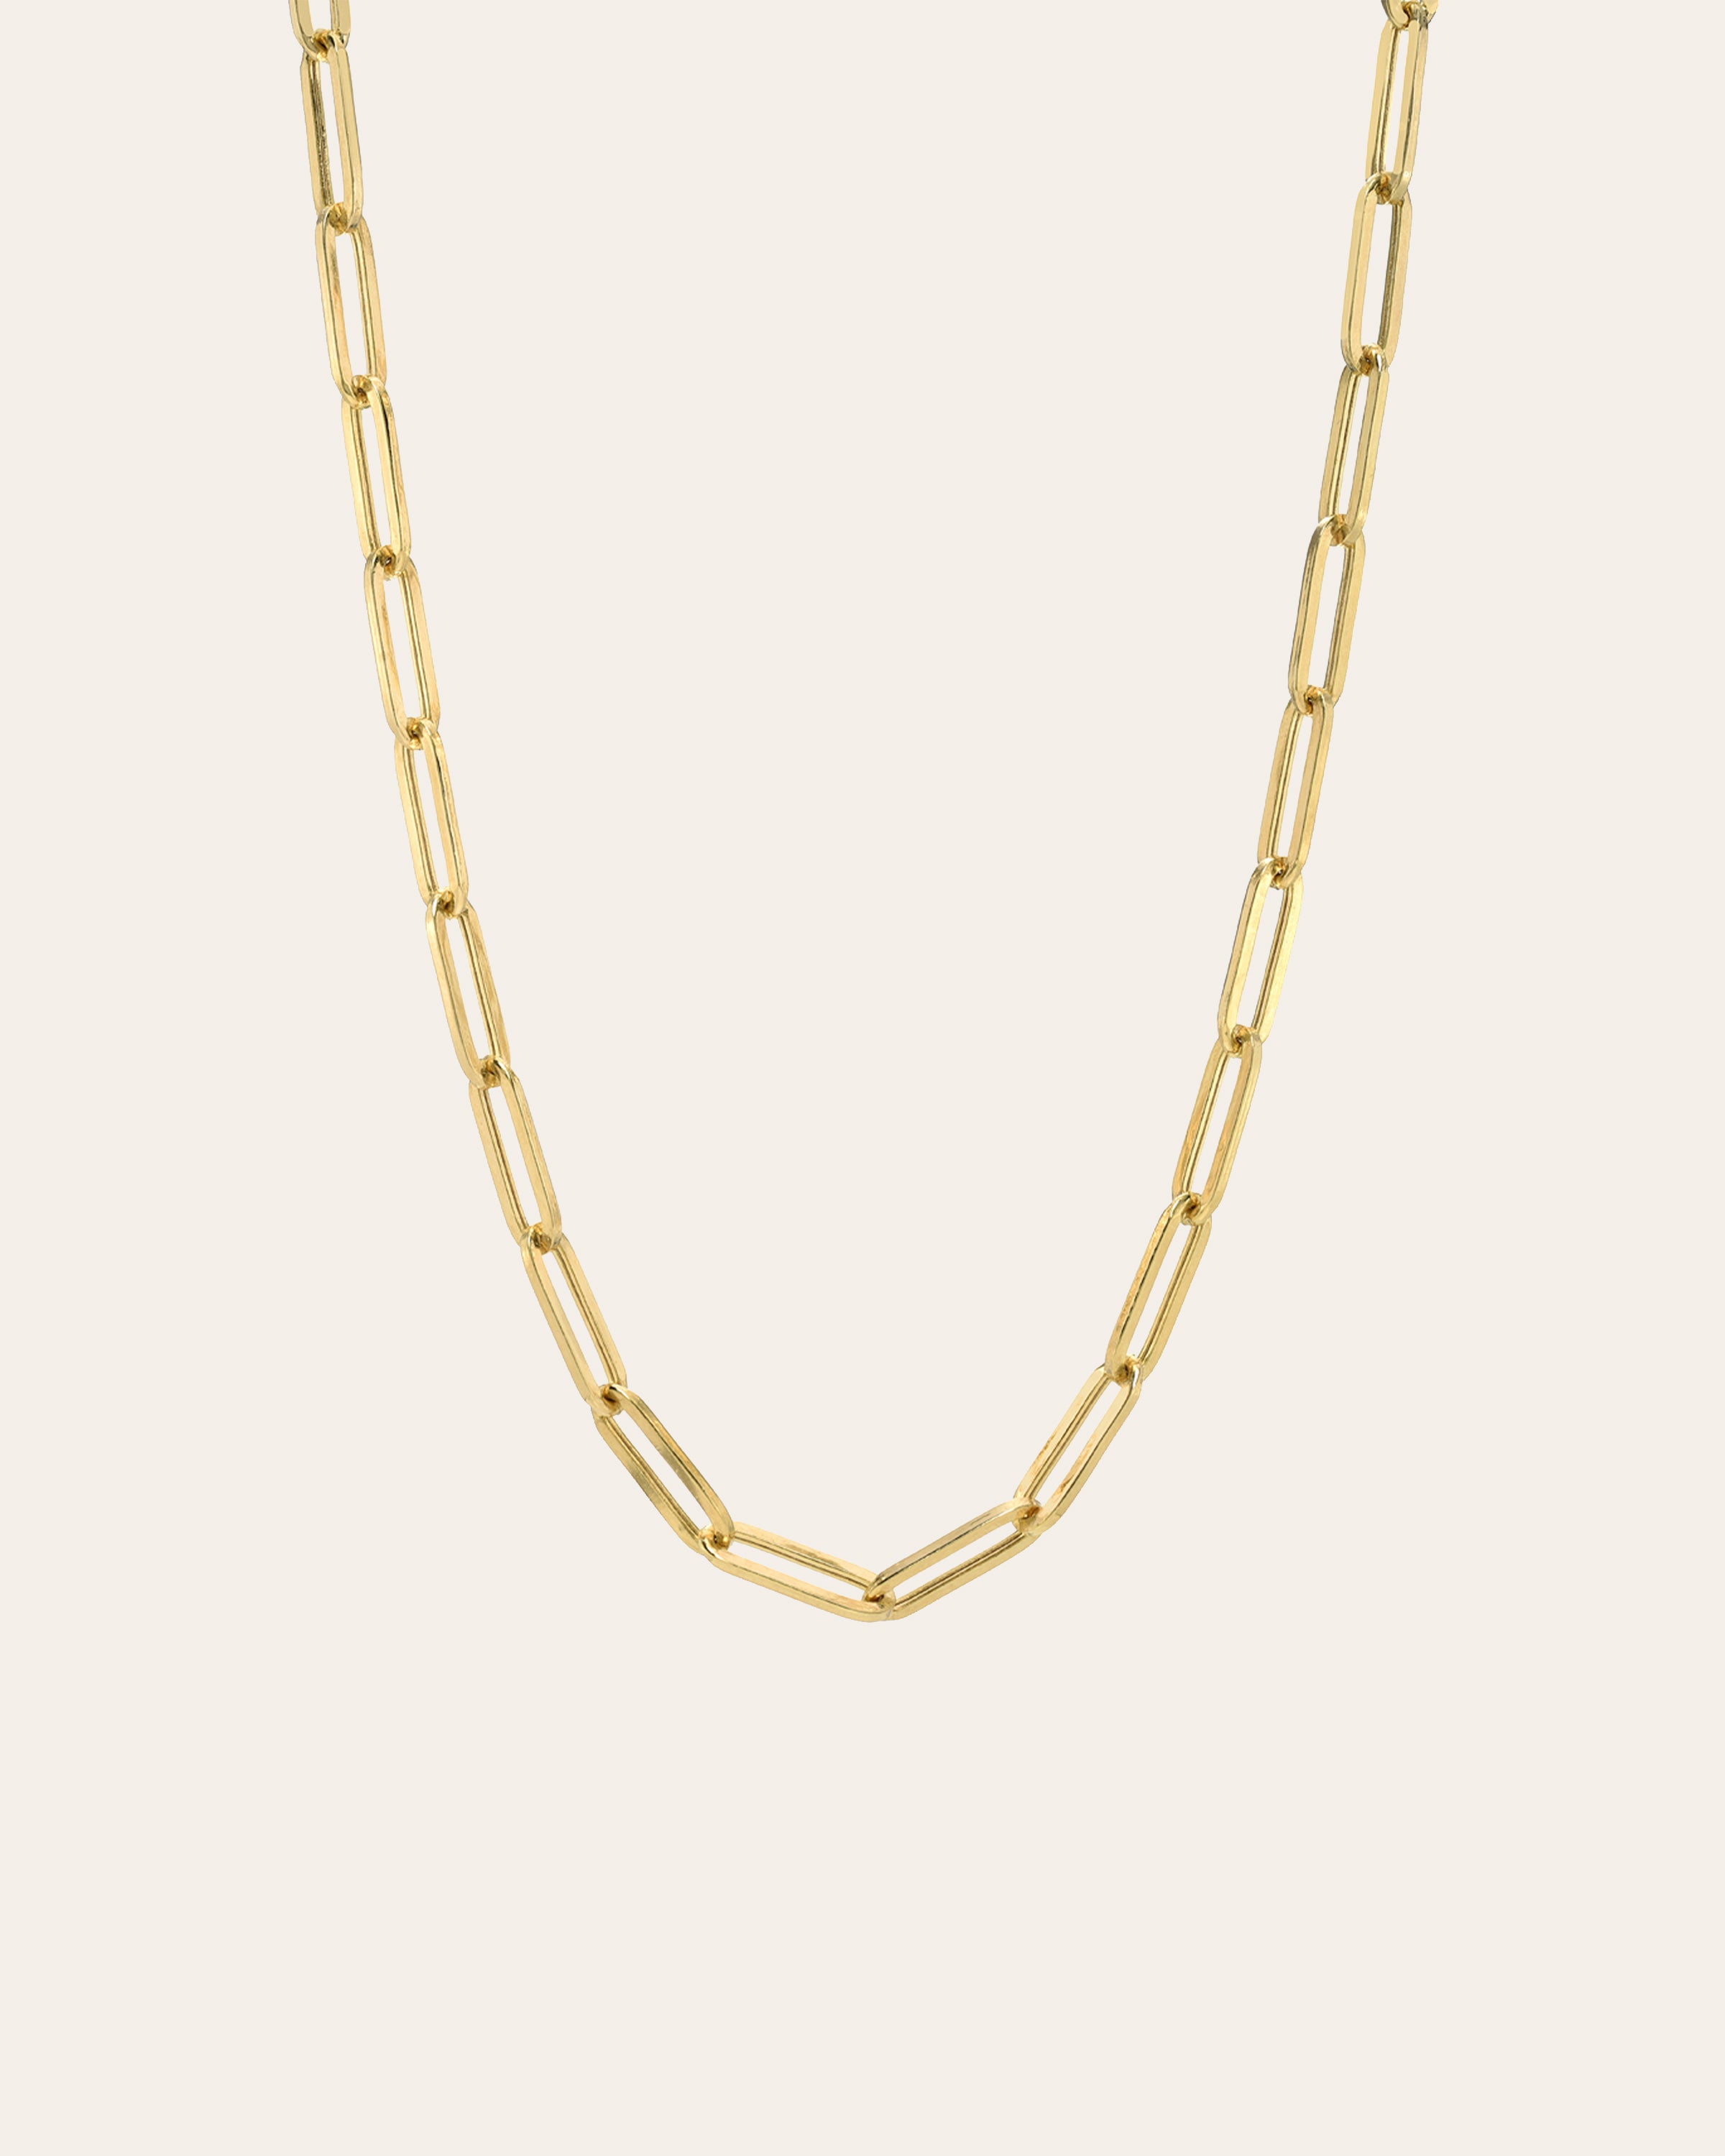  FAY & LOUIS Chunky Gold Chain Big Link Necklaces for Women 14K  Gold Plated Paperclip U Shape Link Chain Choker Paper Clip Trendy Pendant  Cute Jewelry Collares De Mujer De Moda